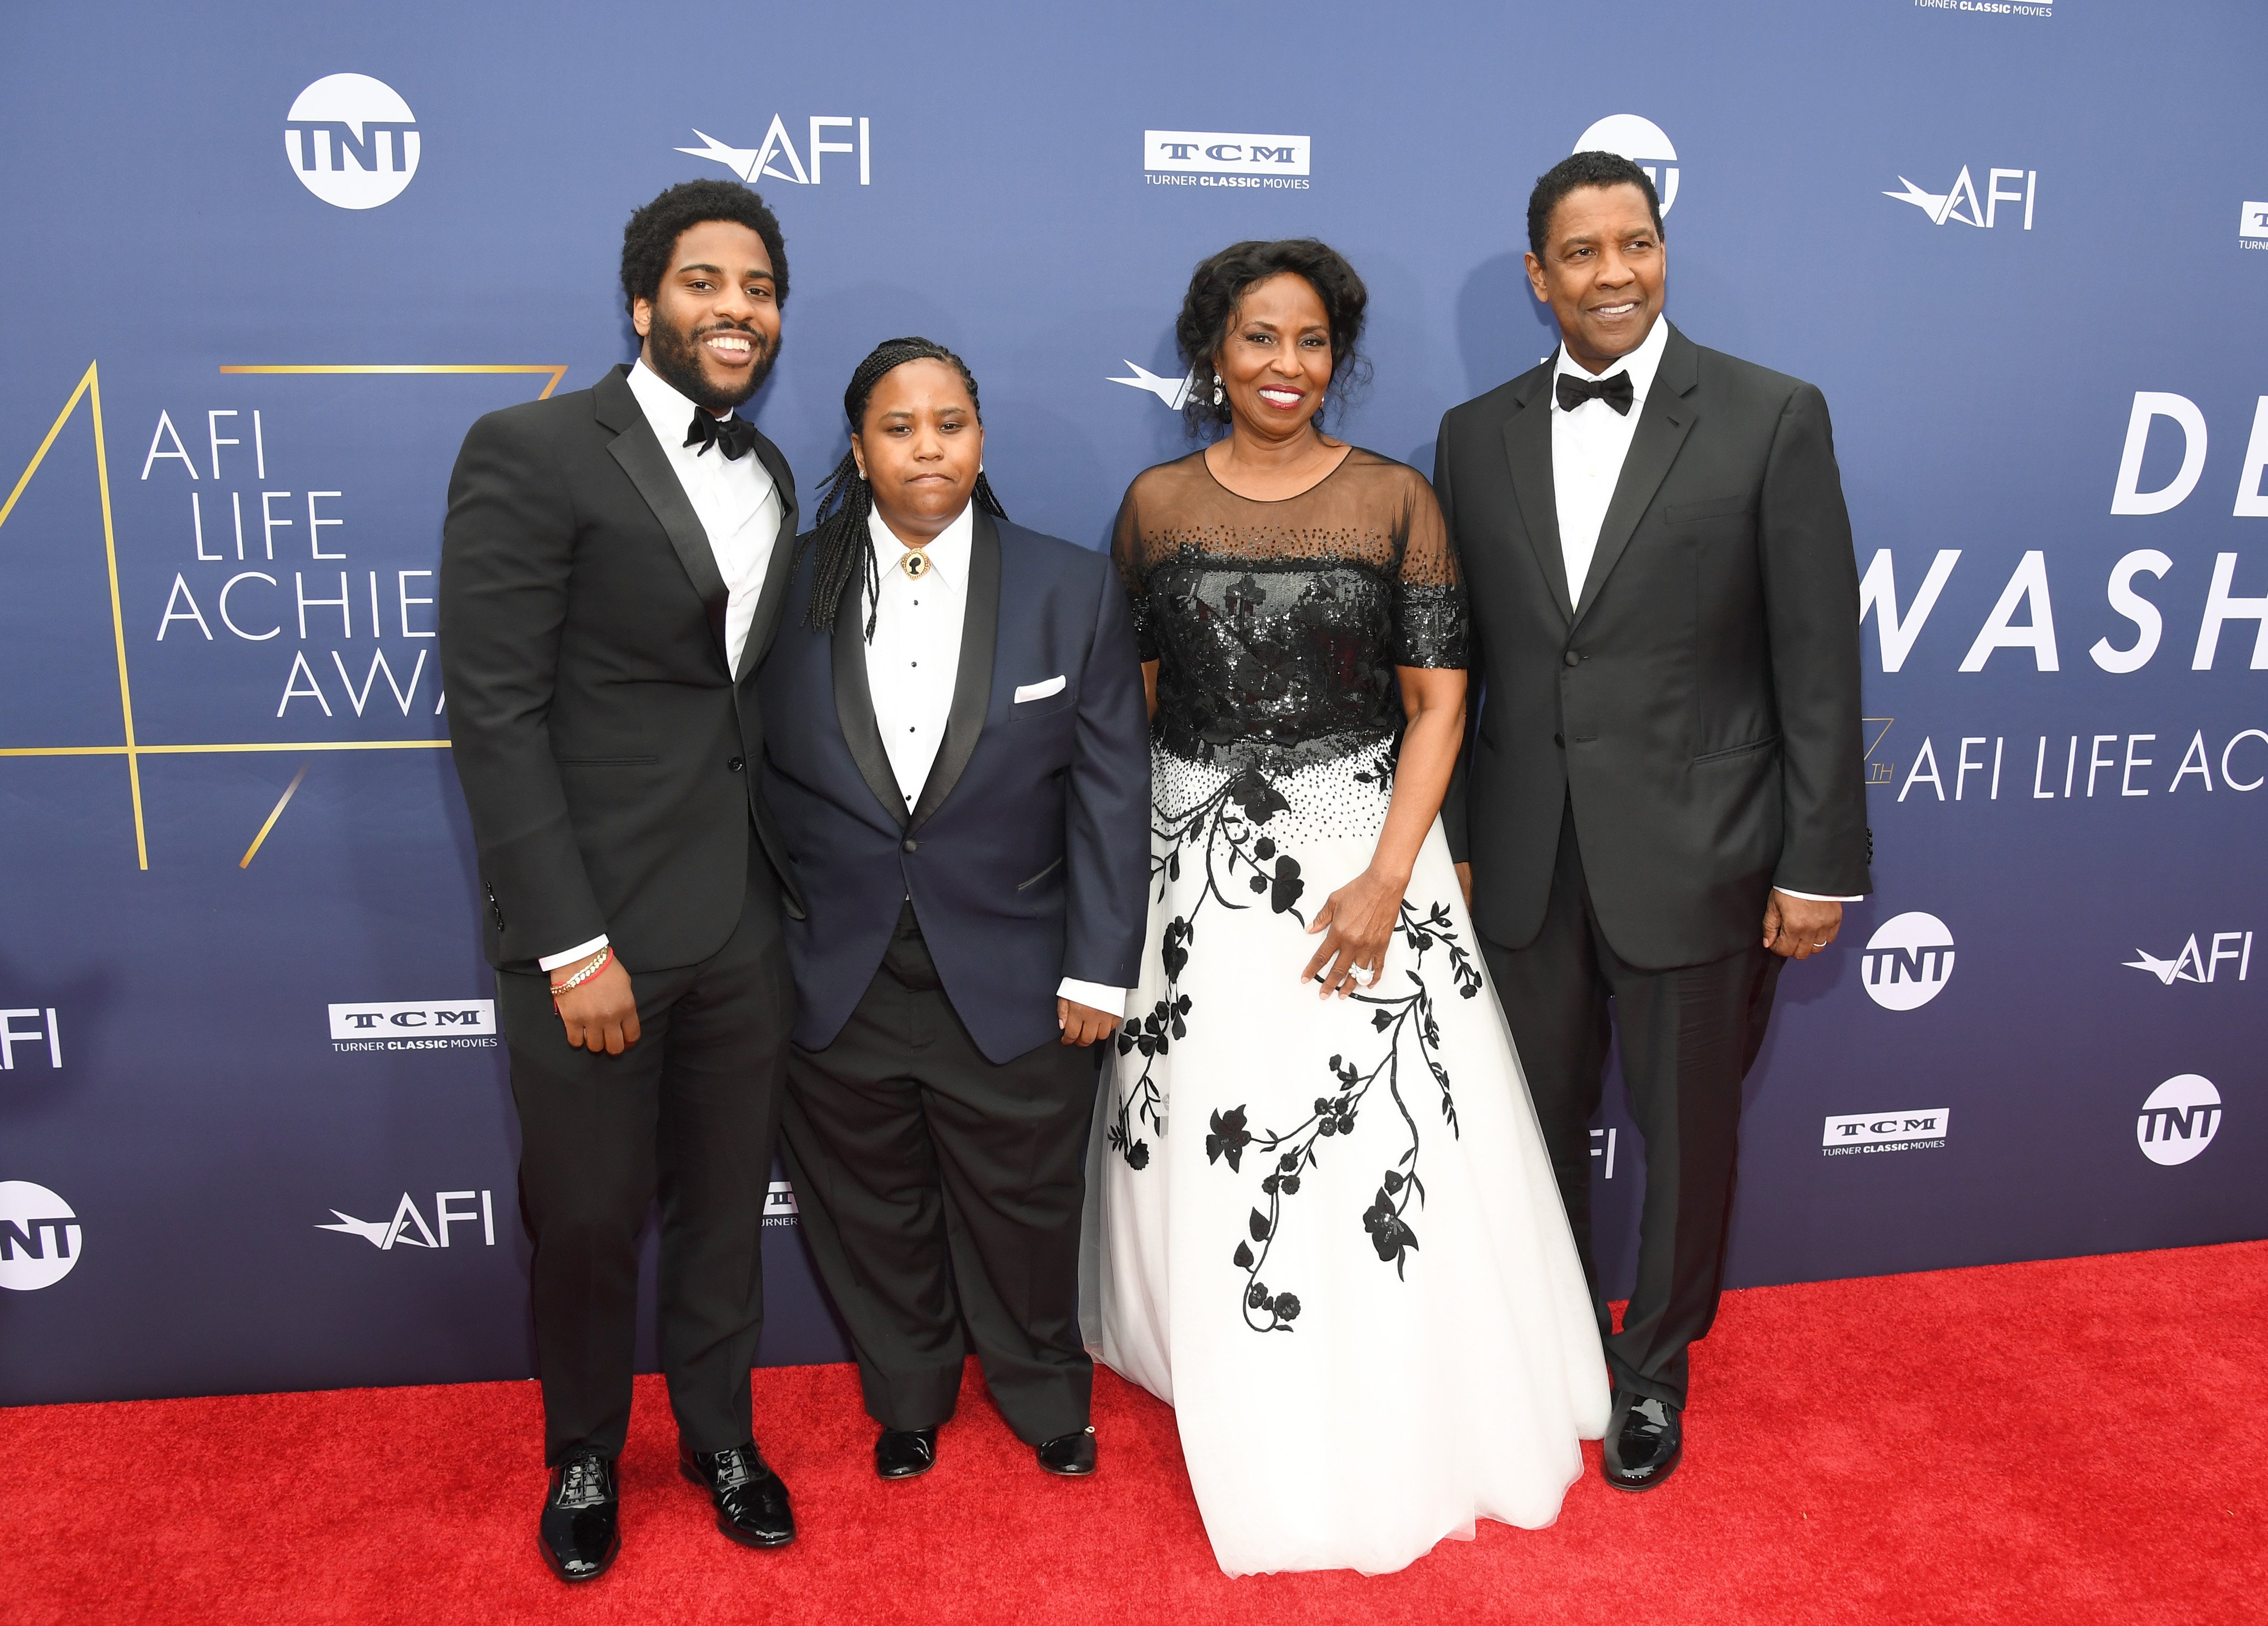 Malcolm, Katia, Pauletta, and honoree Denzel Washington at the 47th AFI Life Achievement Award at Dolby Theatre on June 06, 2019. | Photo: Getty Images